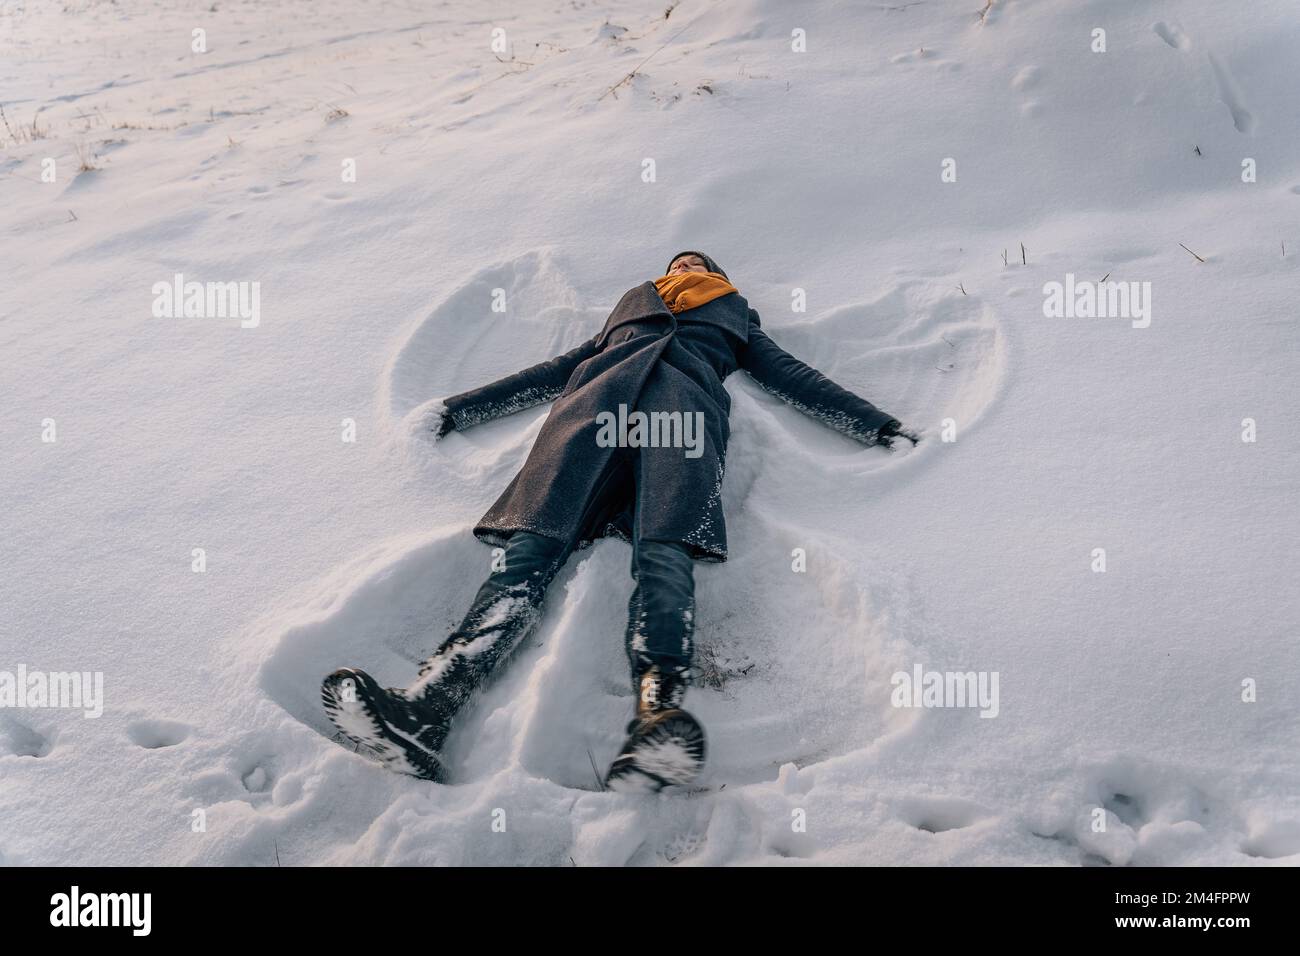 A woman lies in the snow in the shape of a snow angel in winter Stock Photo